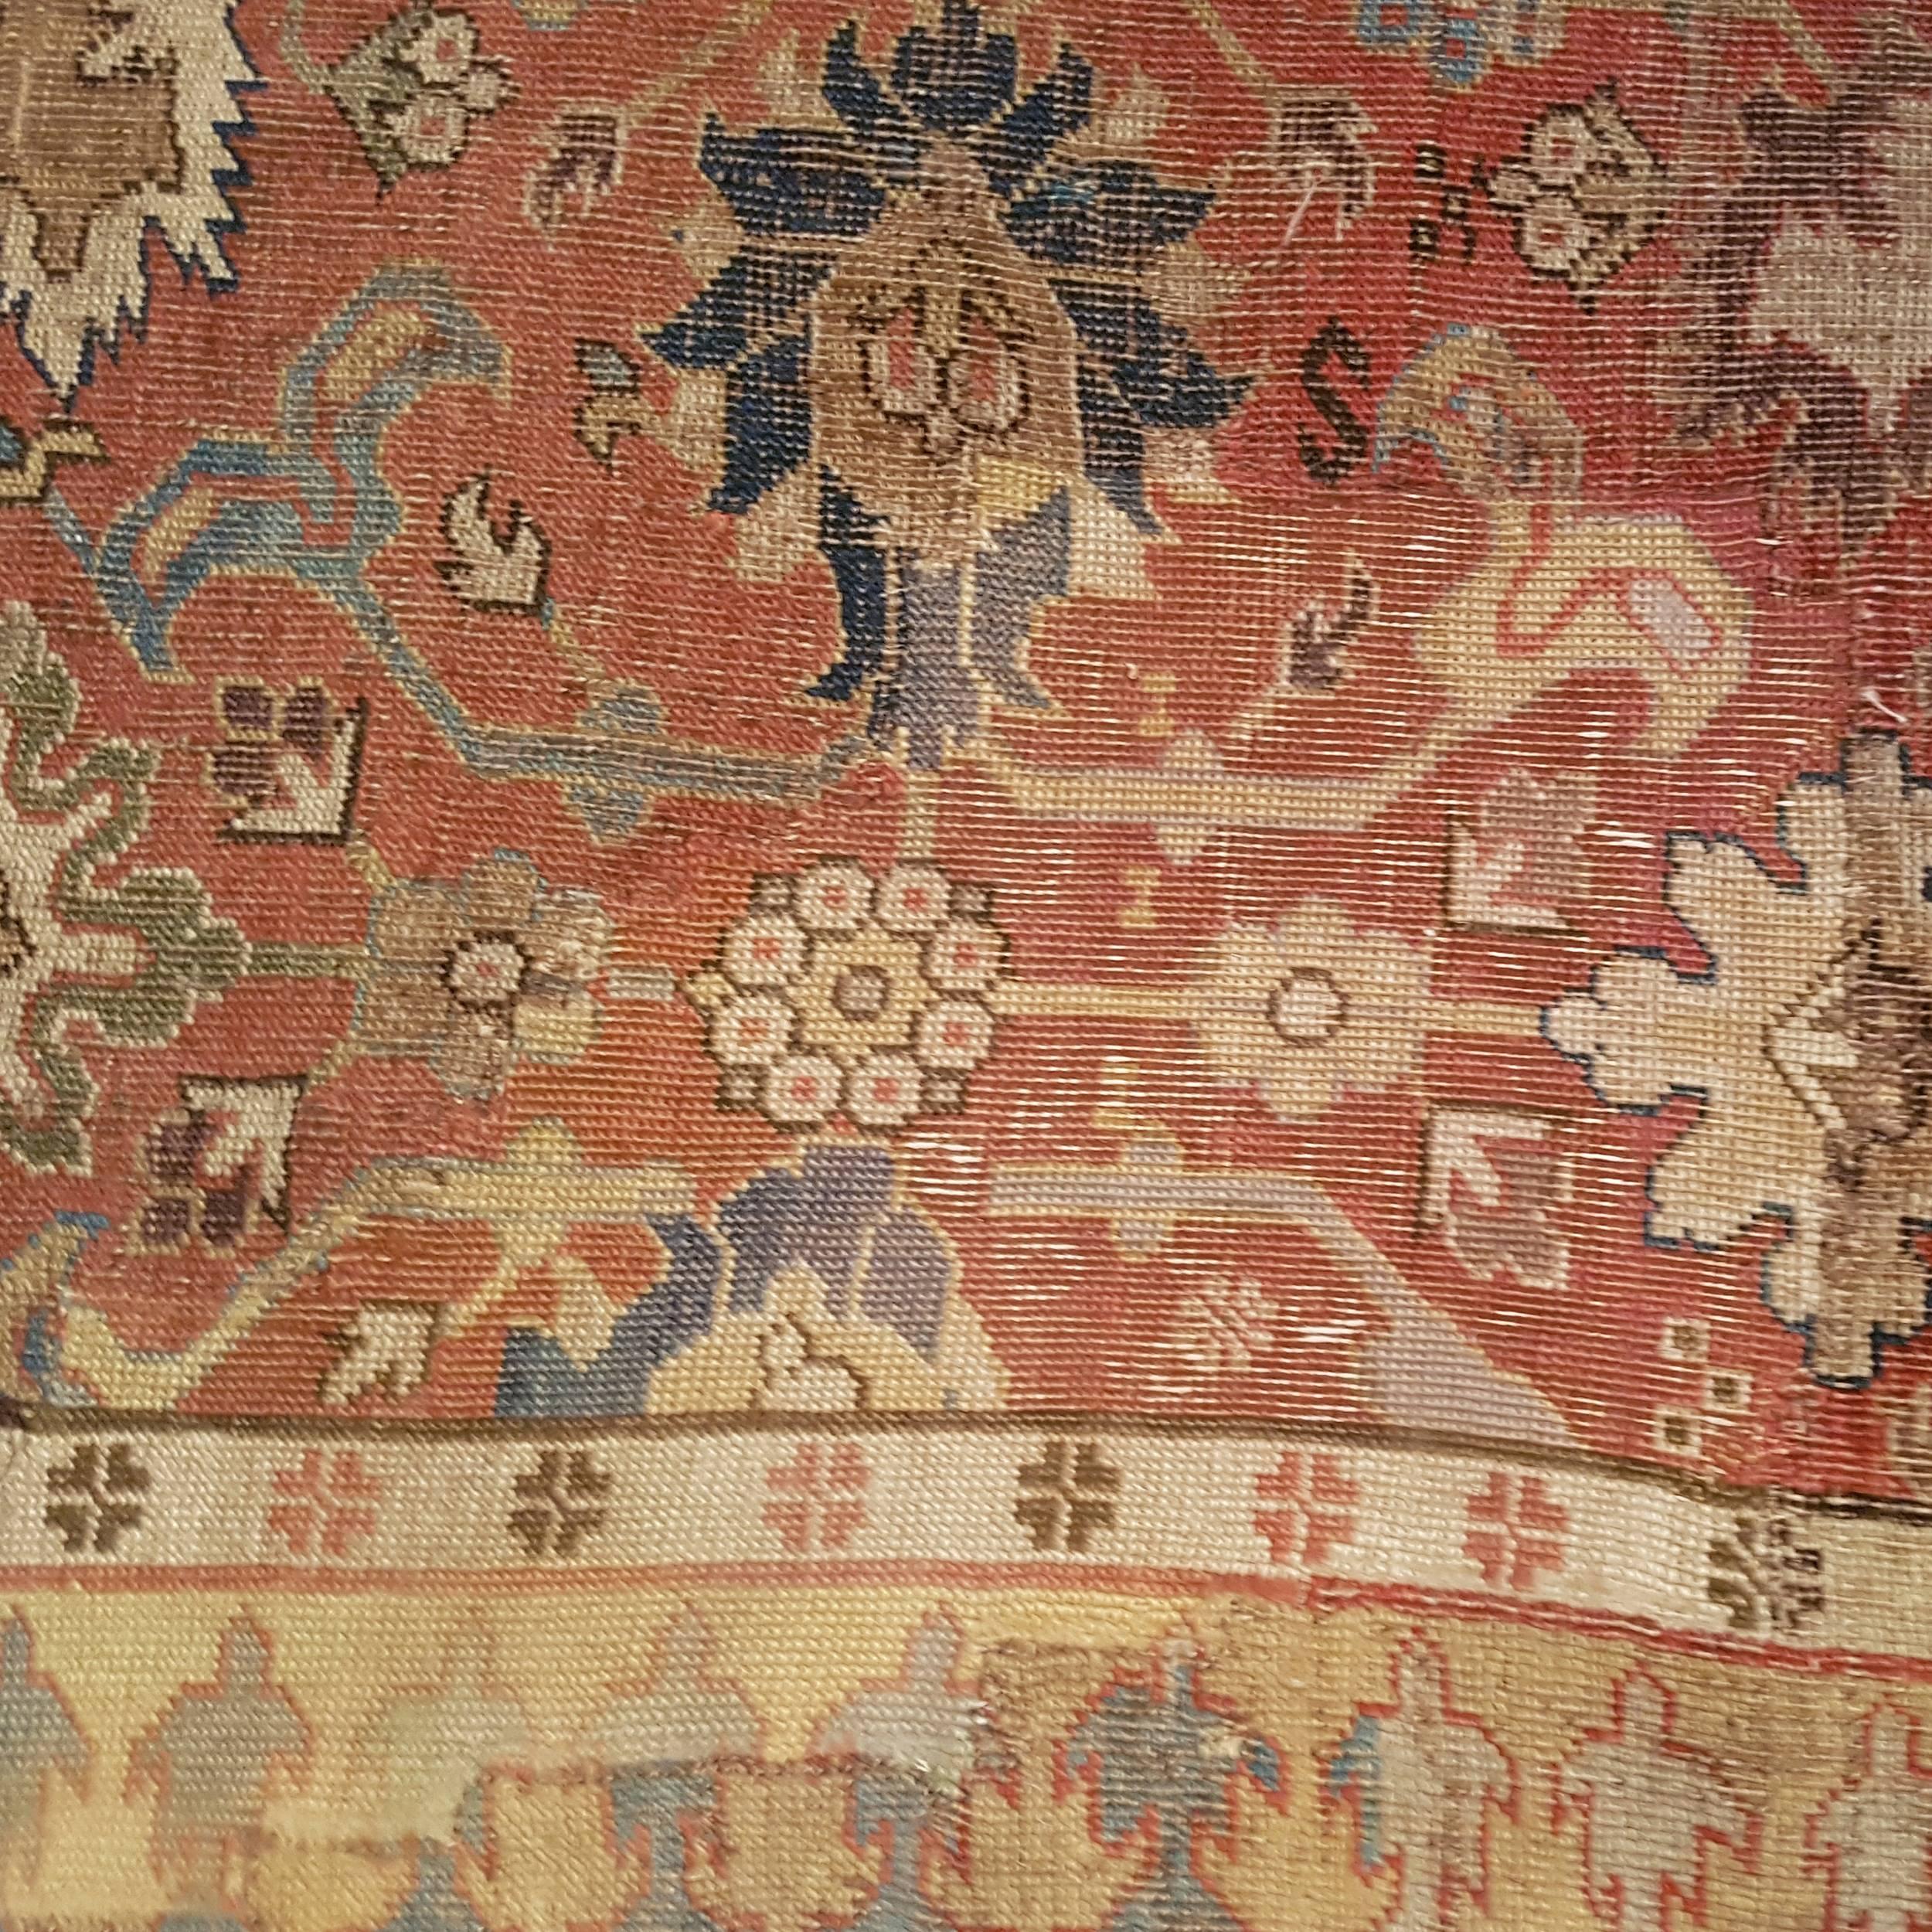 An extremely rare and early Caucasian carpet from present day Armenia ornate by an infinite repeat pattern of palmettes alternated to split-leaf arabesques known also as the 'harshang' design. This derives from 17th century Safavid 'Vase' carpets